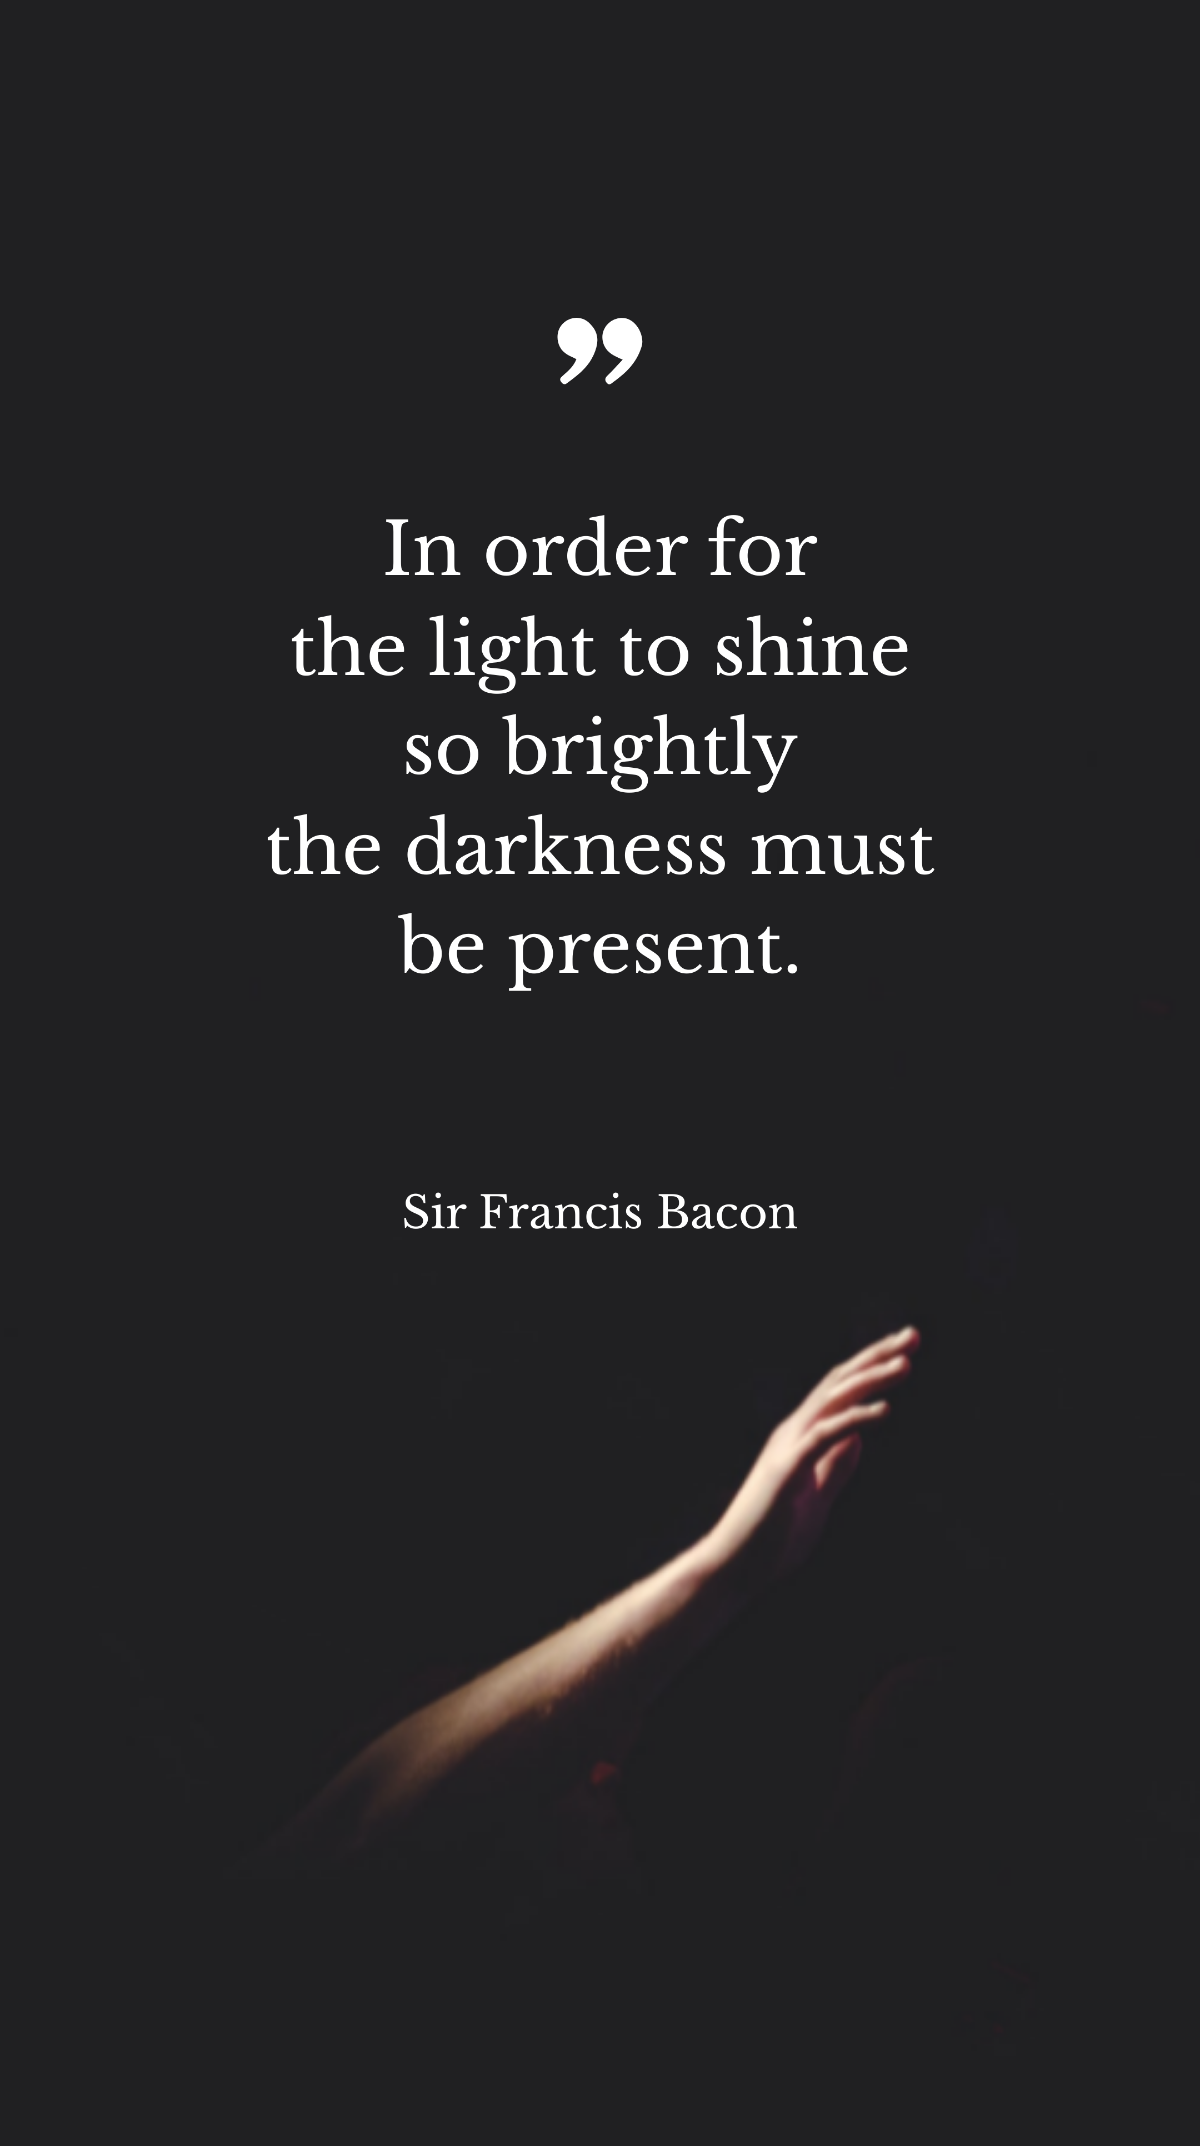 Sir Francis Bacon - In order for the light to shine so brightly the darkness must be present. Template